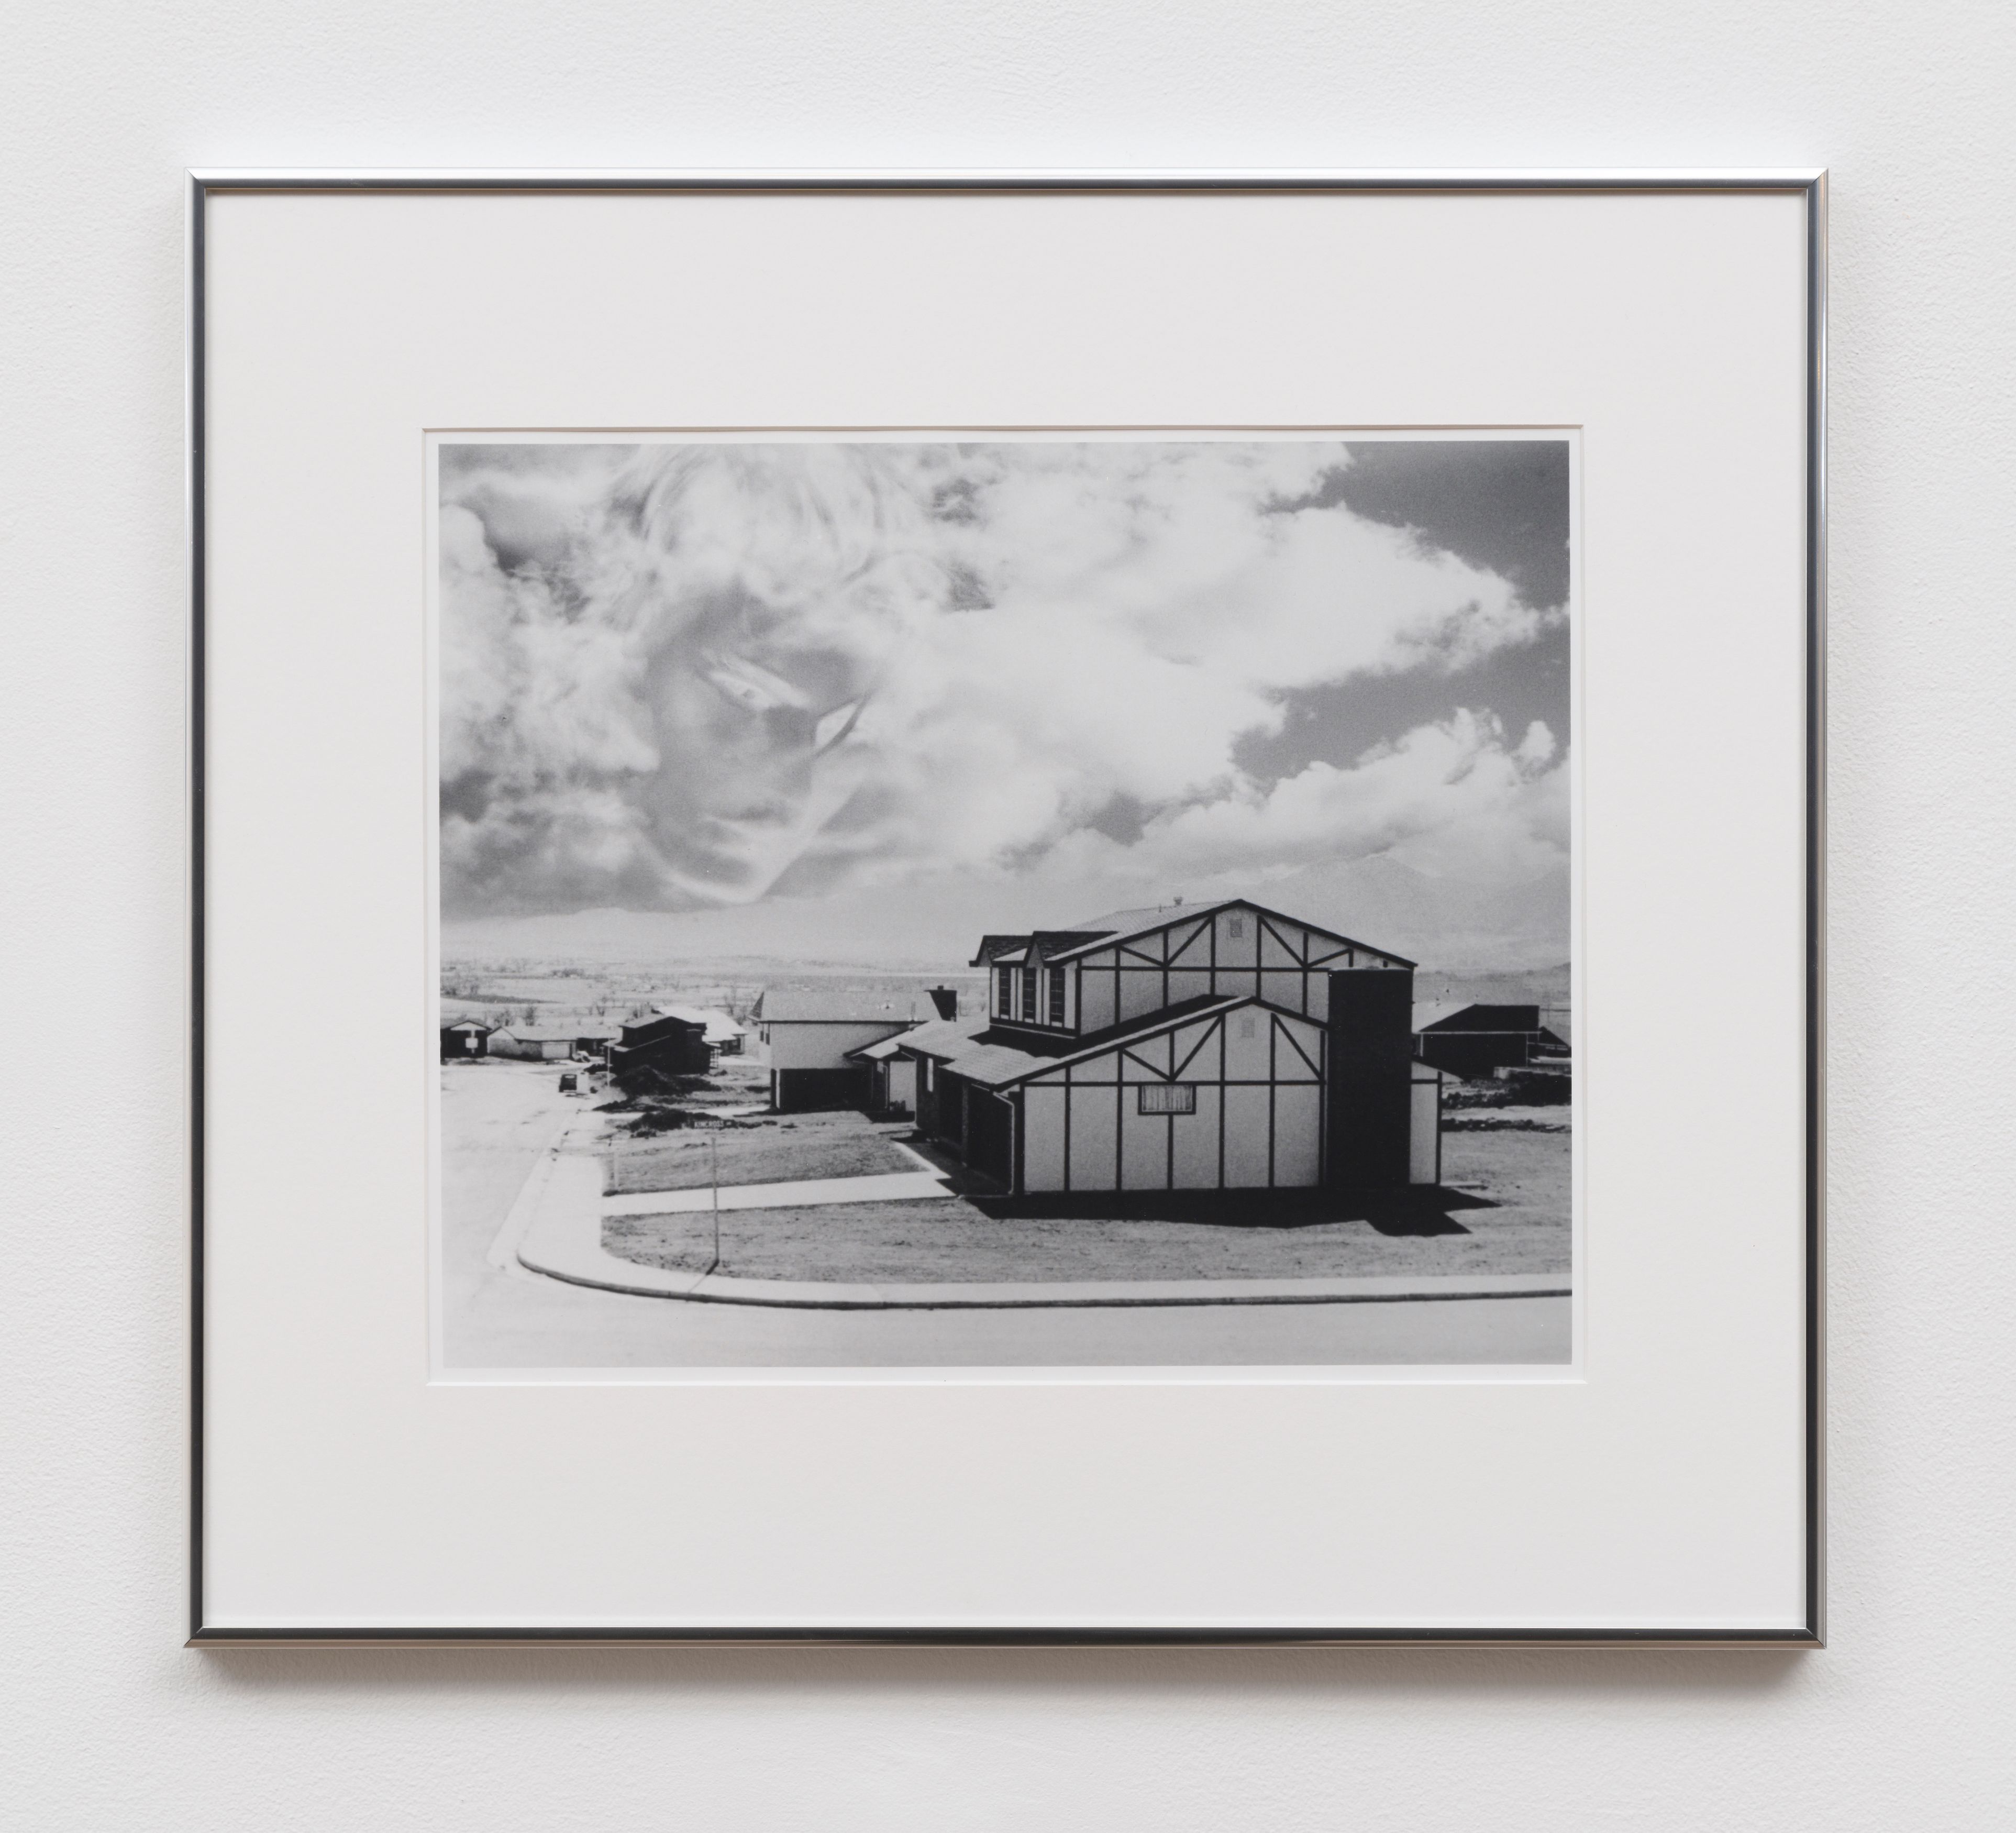 Erin Calla Watson, Tract house, Boulder County, Colorado, 2023, gelatin silver print, 11 3/16 x 14 in. (28.37 x 35.56 cm) (image size), 18 x 20 in. (45.72 x 50.08 cm) (framed size), edition of 3 with 2 AP